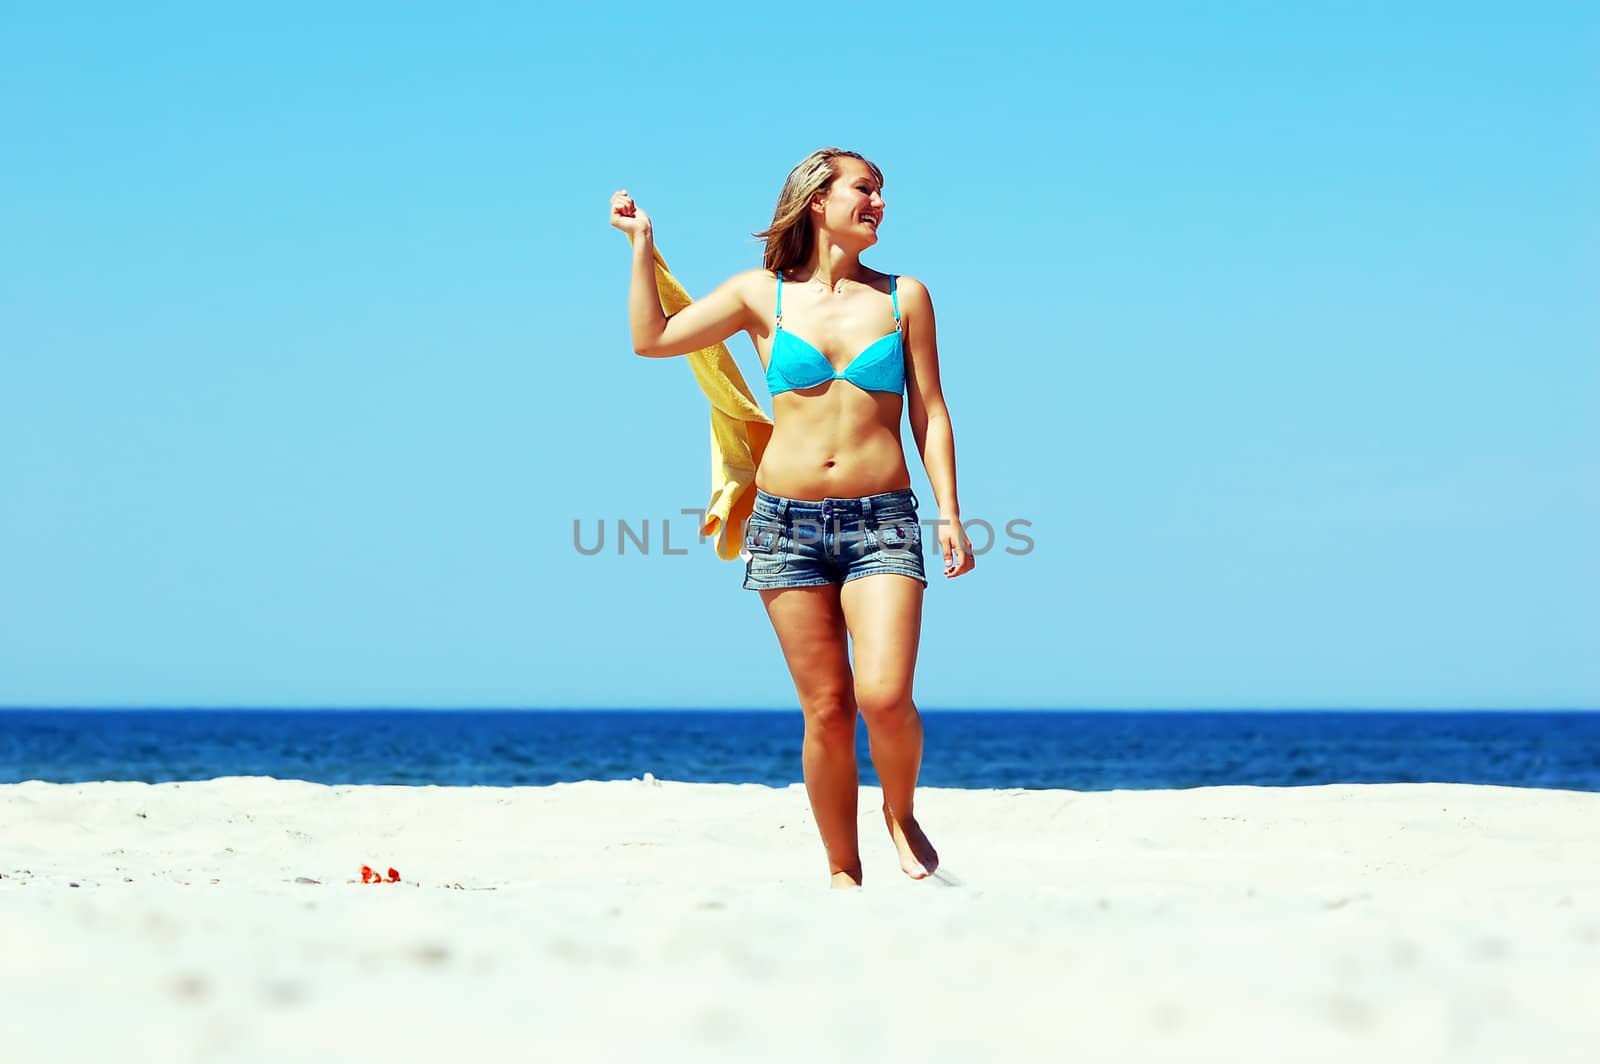 Young attractive woman enjoying summertime on the beach